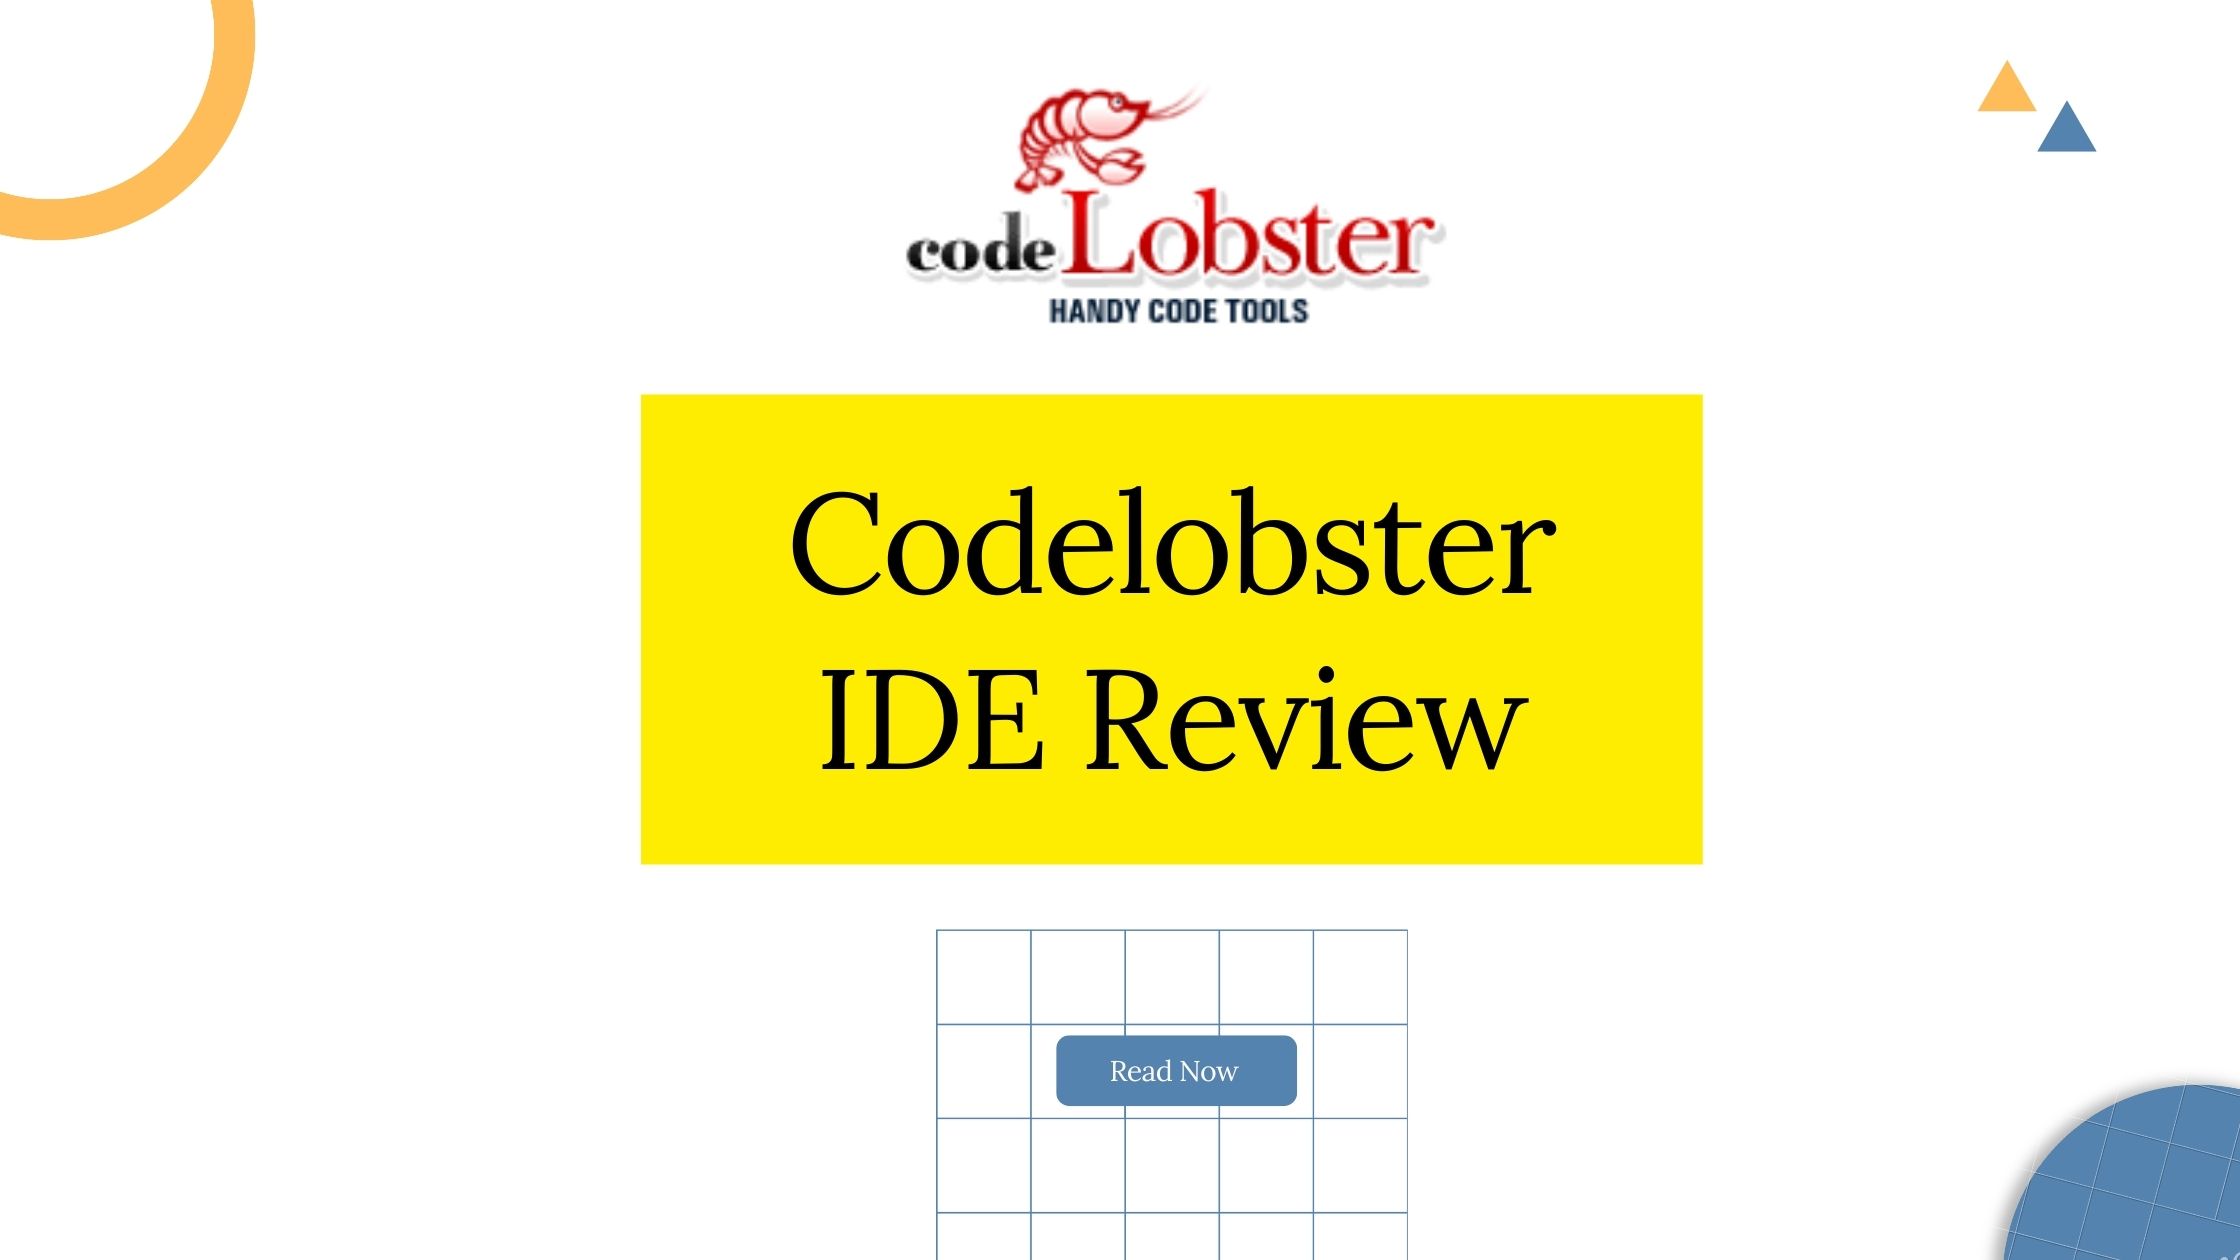 Review of Codelobster IDE